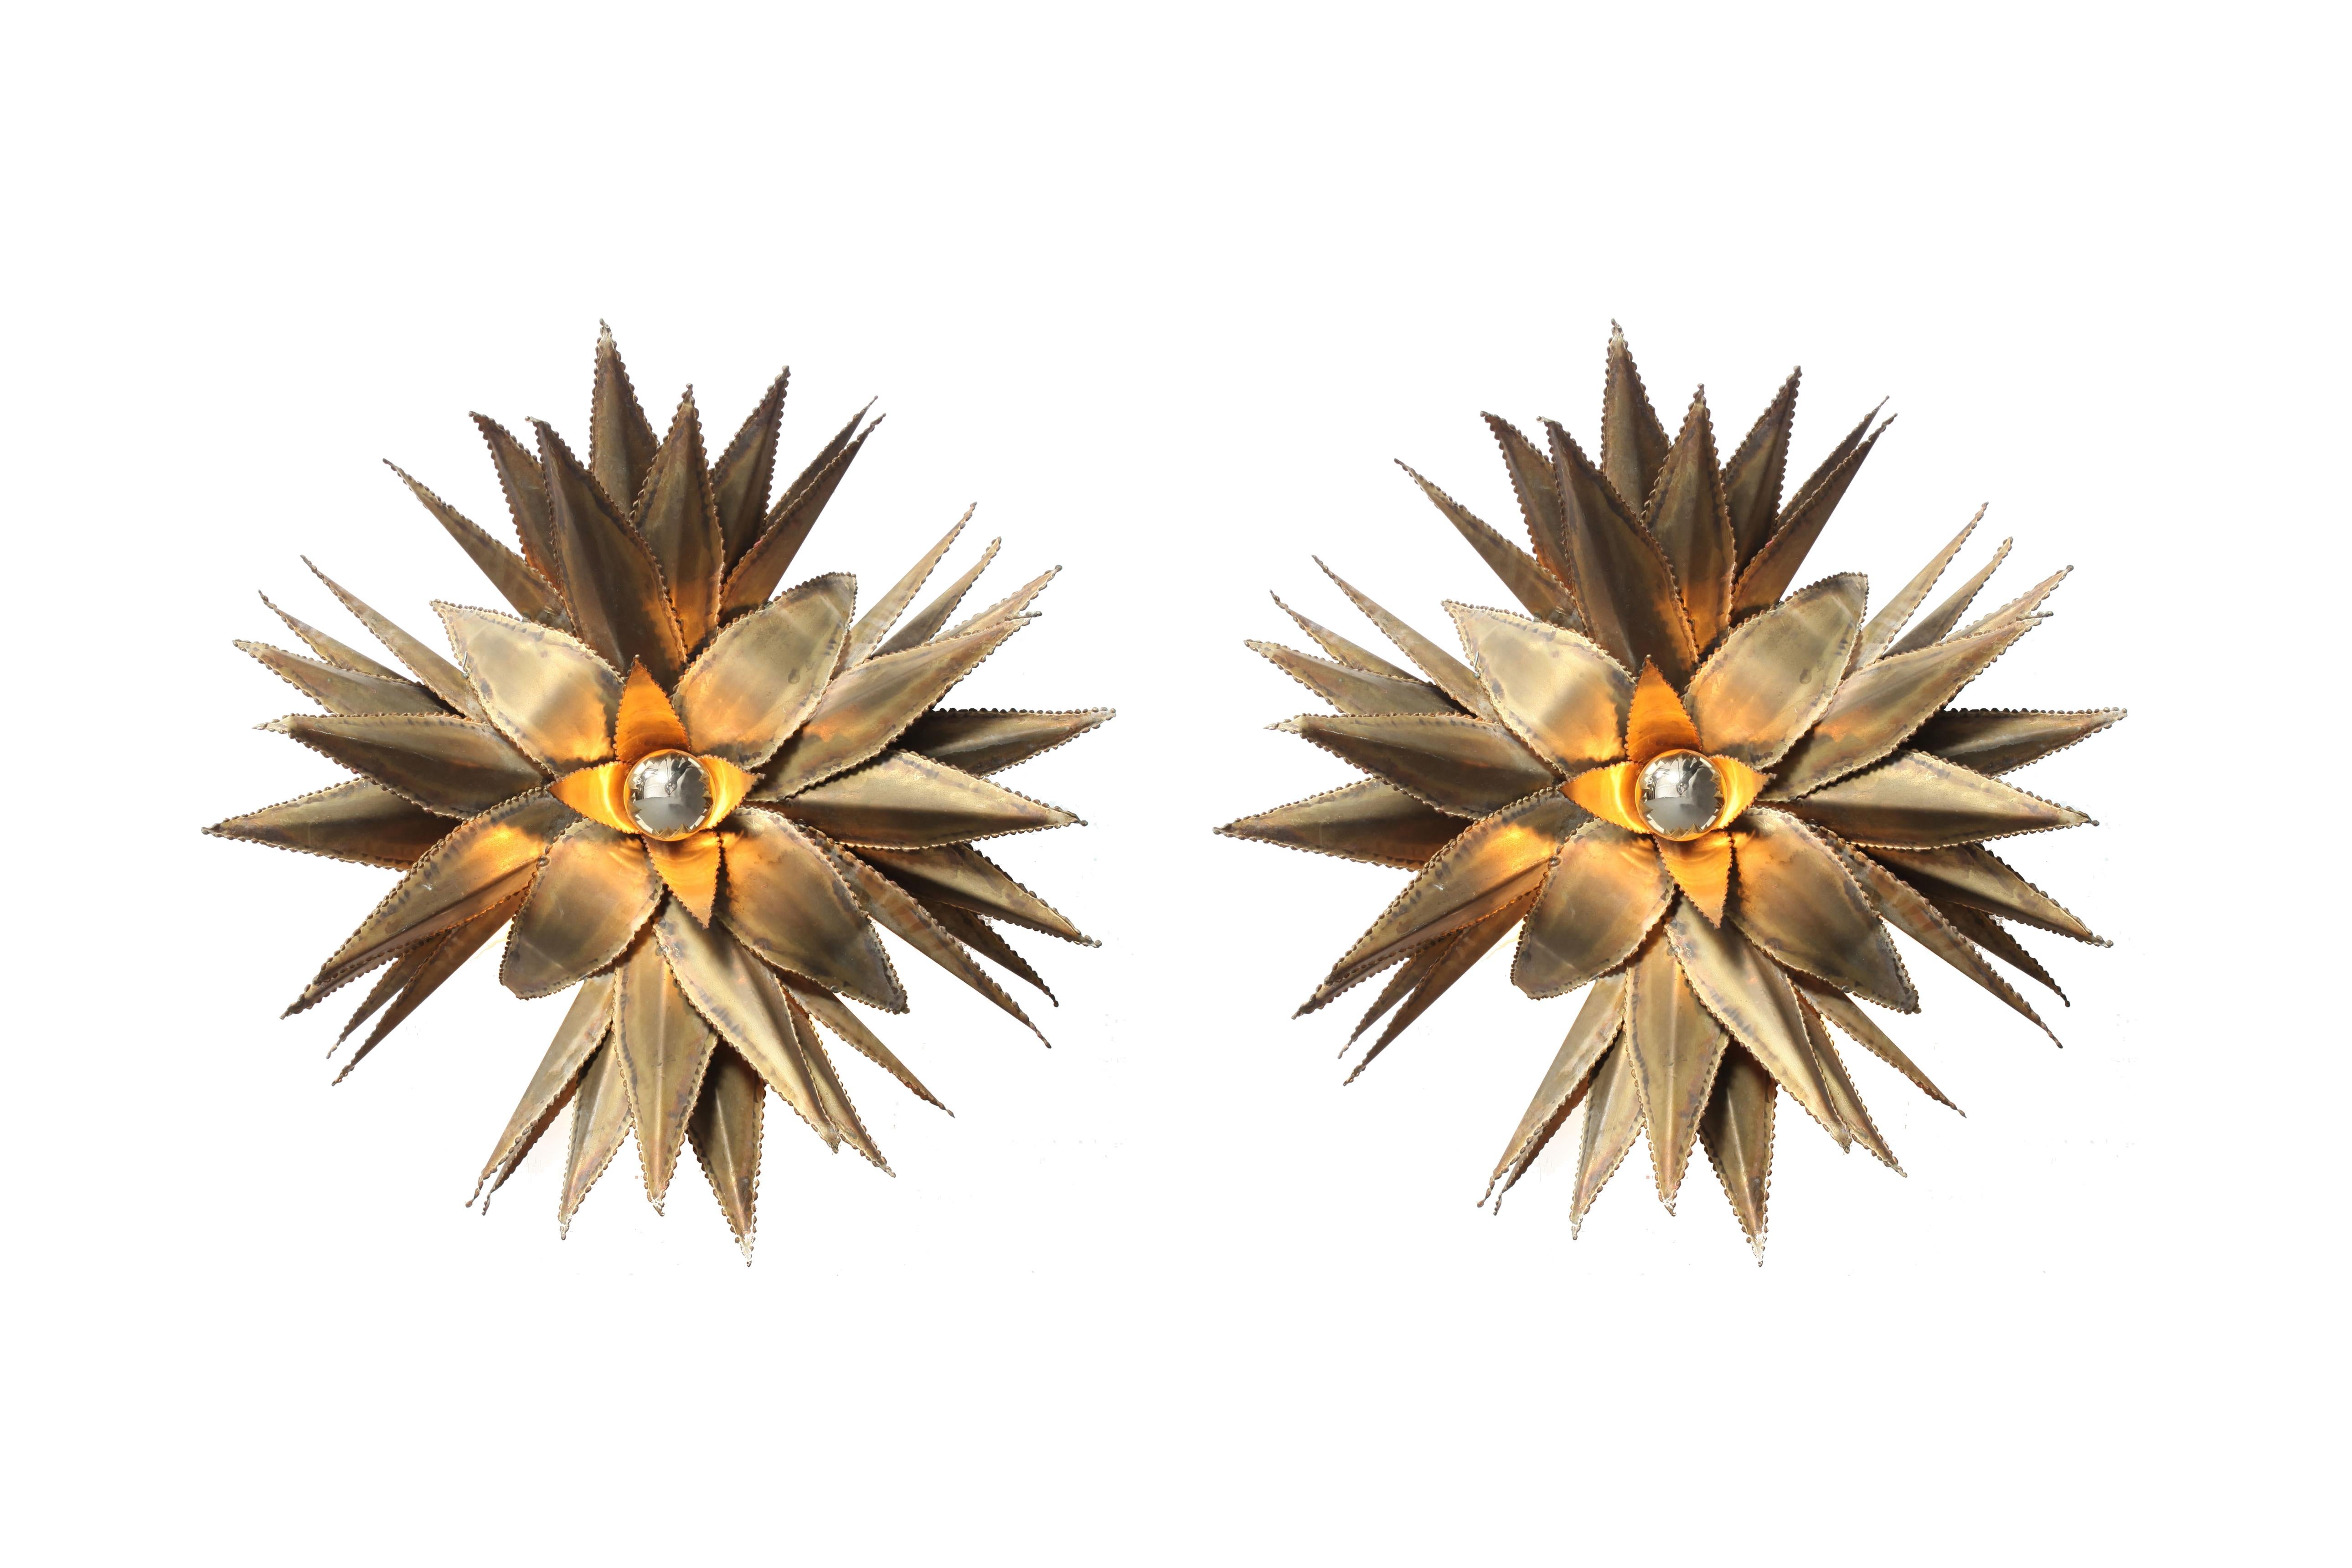 Hollywood Regency handmade fixtures by Maison Jansen, France, 1970s
Brass star shaped palm tree wall light, custom made for a Belgian hotel in the 1970s.

Throughout the firm's history, it employed a traditional style drawing upon European